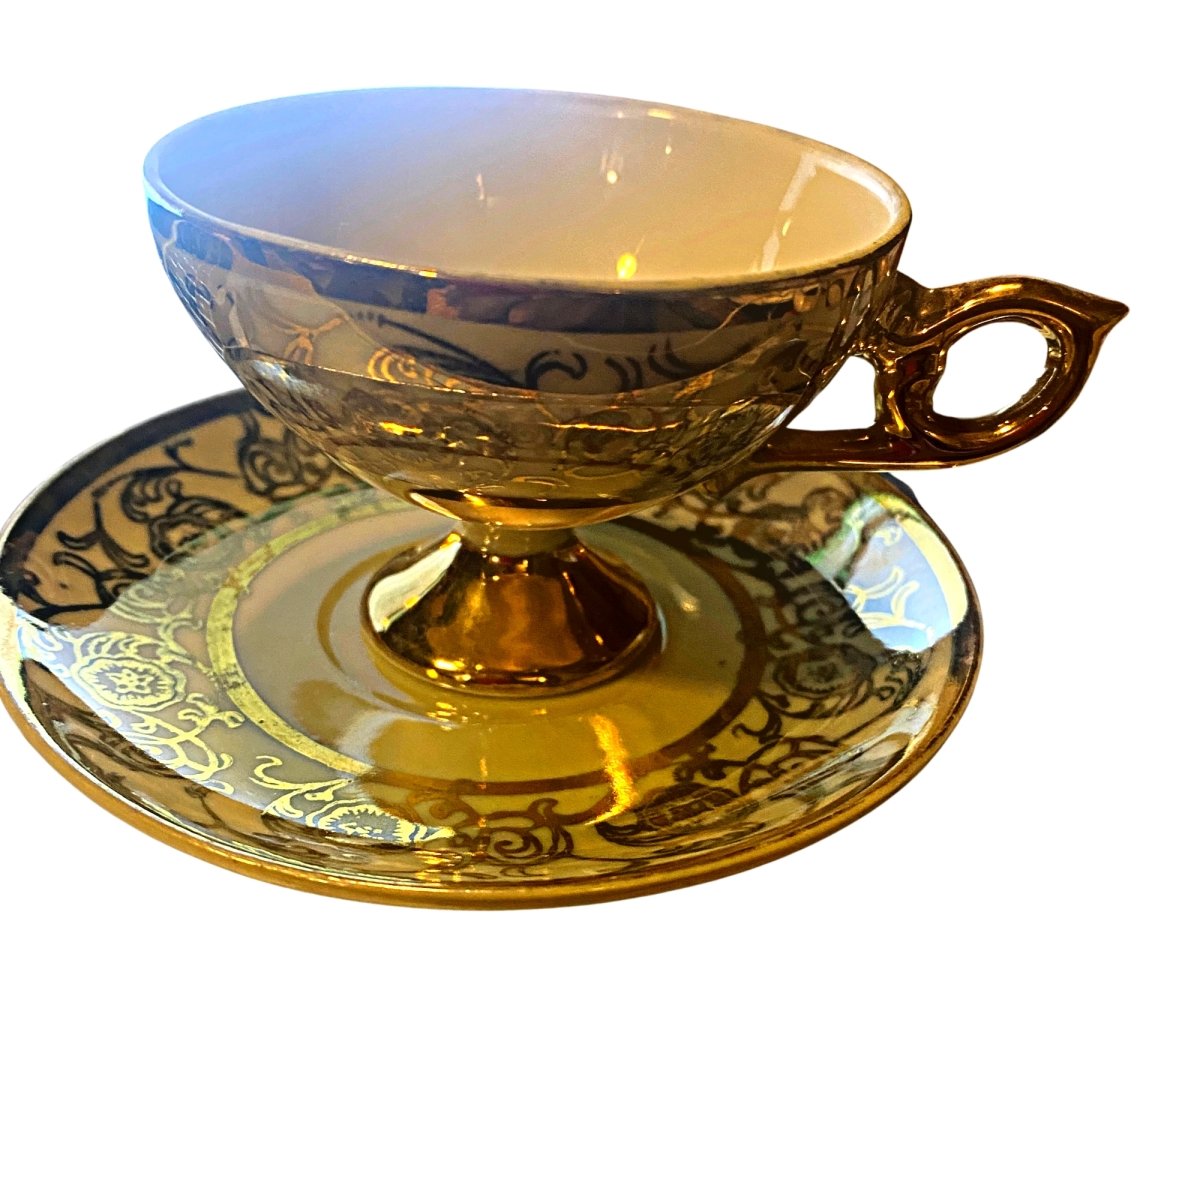 Lusterware | Ivory Pedestal Footed | Mocha Cup w. Golden Flower & Vine Decoration on the Rim - Chinamania.shop